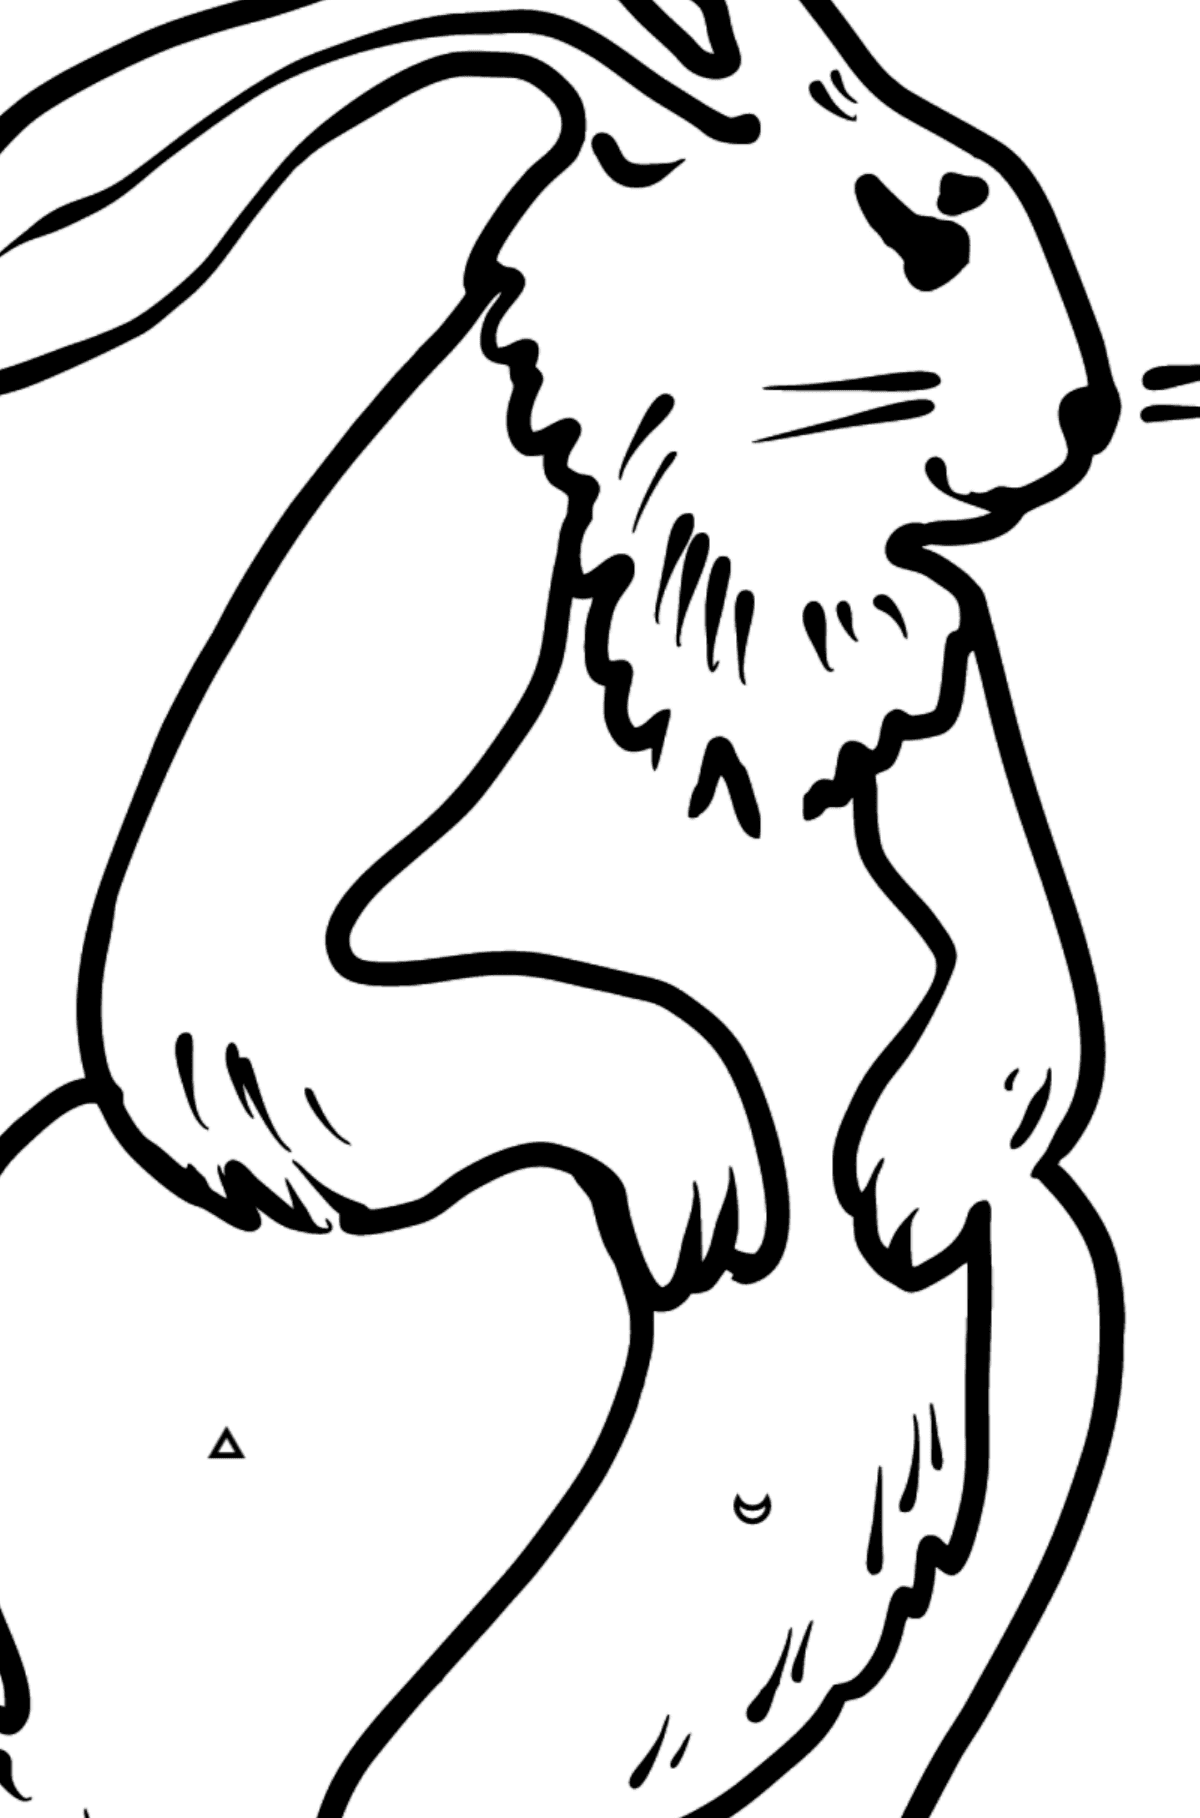 Rabbit coloring page - Coloring by Symbols and Geometric Shapes for Kids